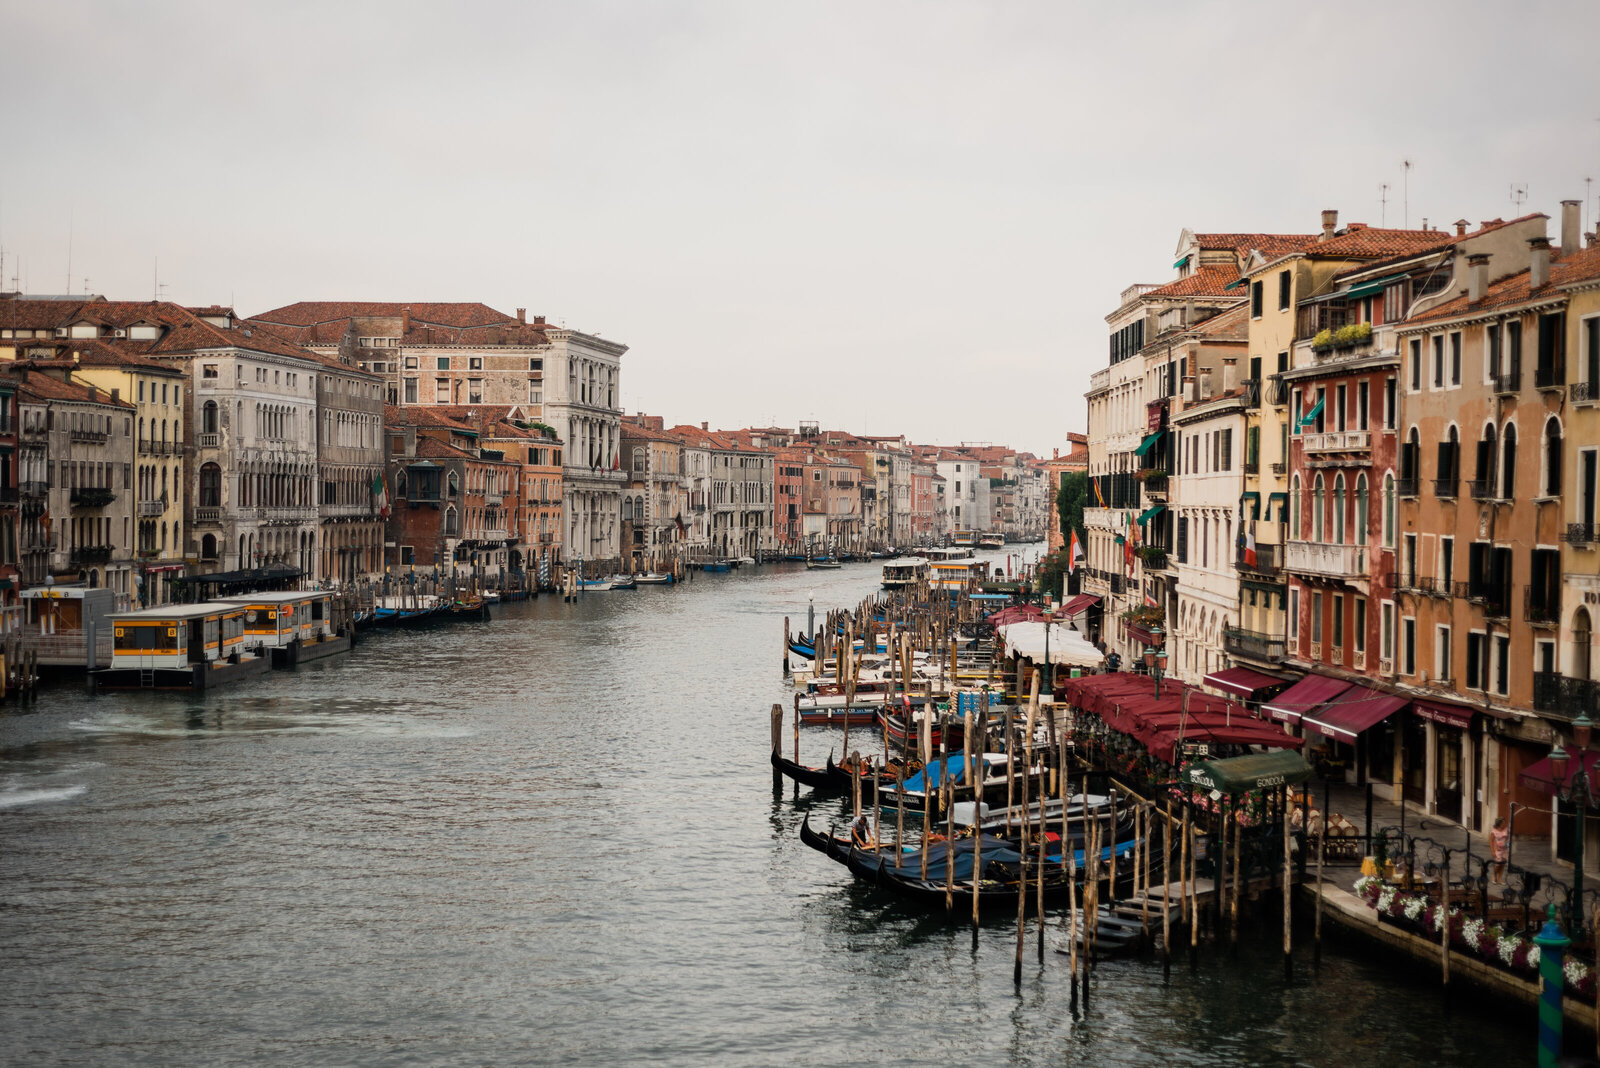 The main canal in Venice, Italy